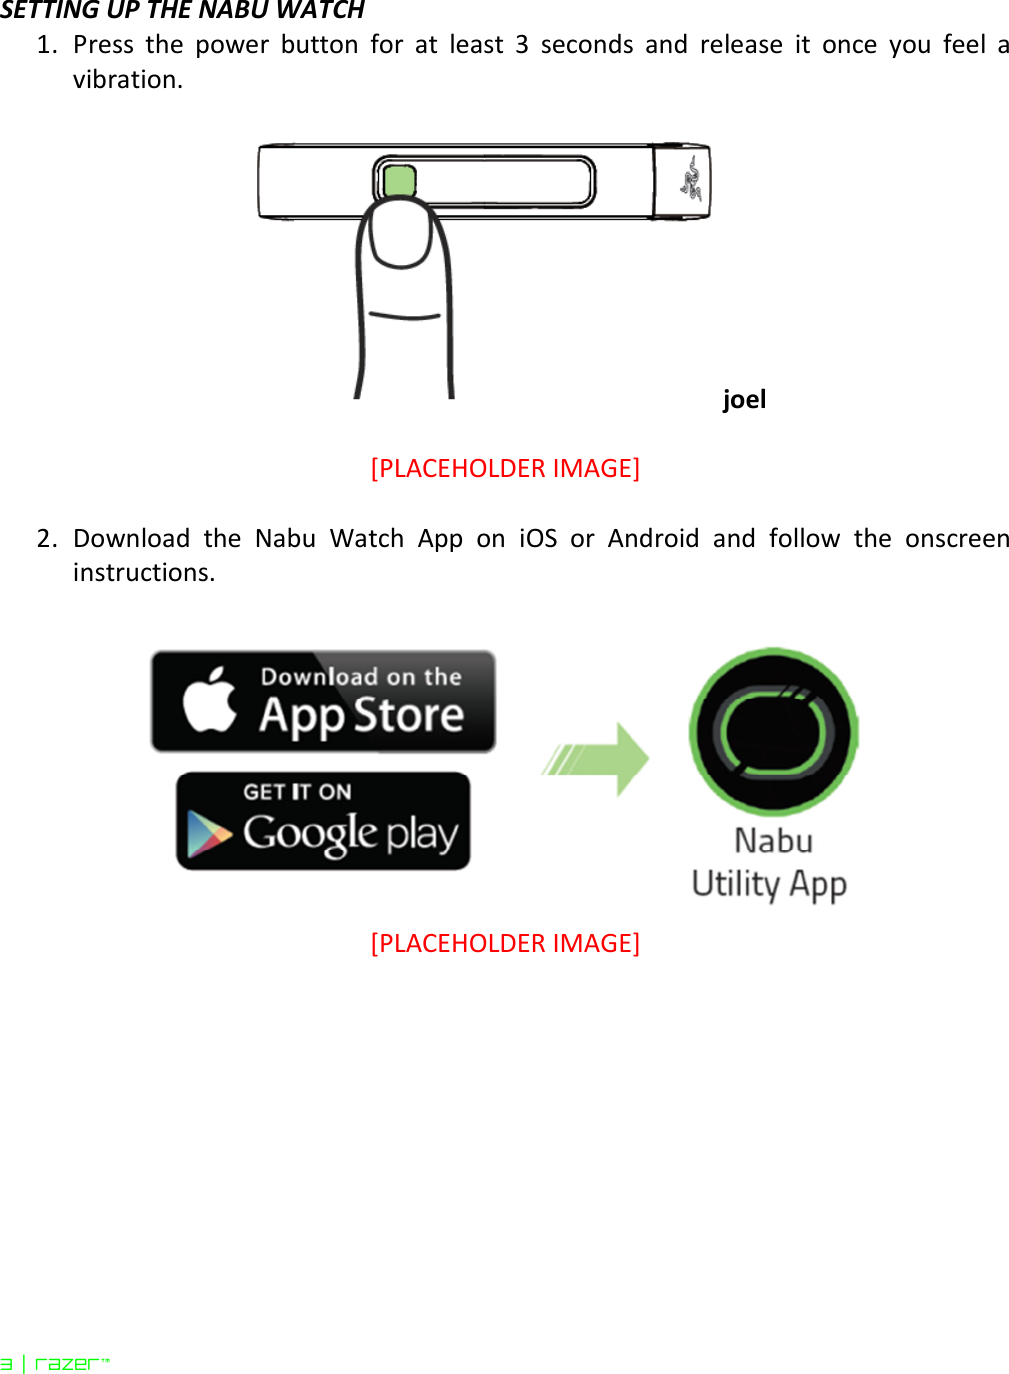  3 | razer™  SETTING UP THE NABU WATCH 1. Press  the  power  button  for  at  least  3  seconds  and  release  it  once  you  feel  a vibration.  joel  [PLACEHOLDER IMAGE]  2. Download  the  Nabu  Watch  App  on  iOS  or  Android  and  follow  the  onscreen instructions.   [PLACEHOLDER IMAGE]    